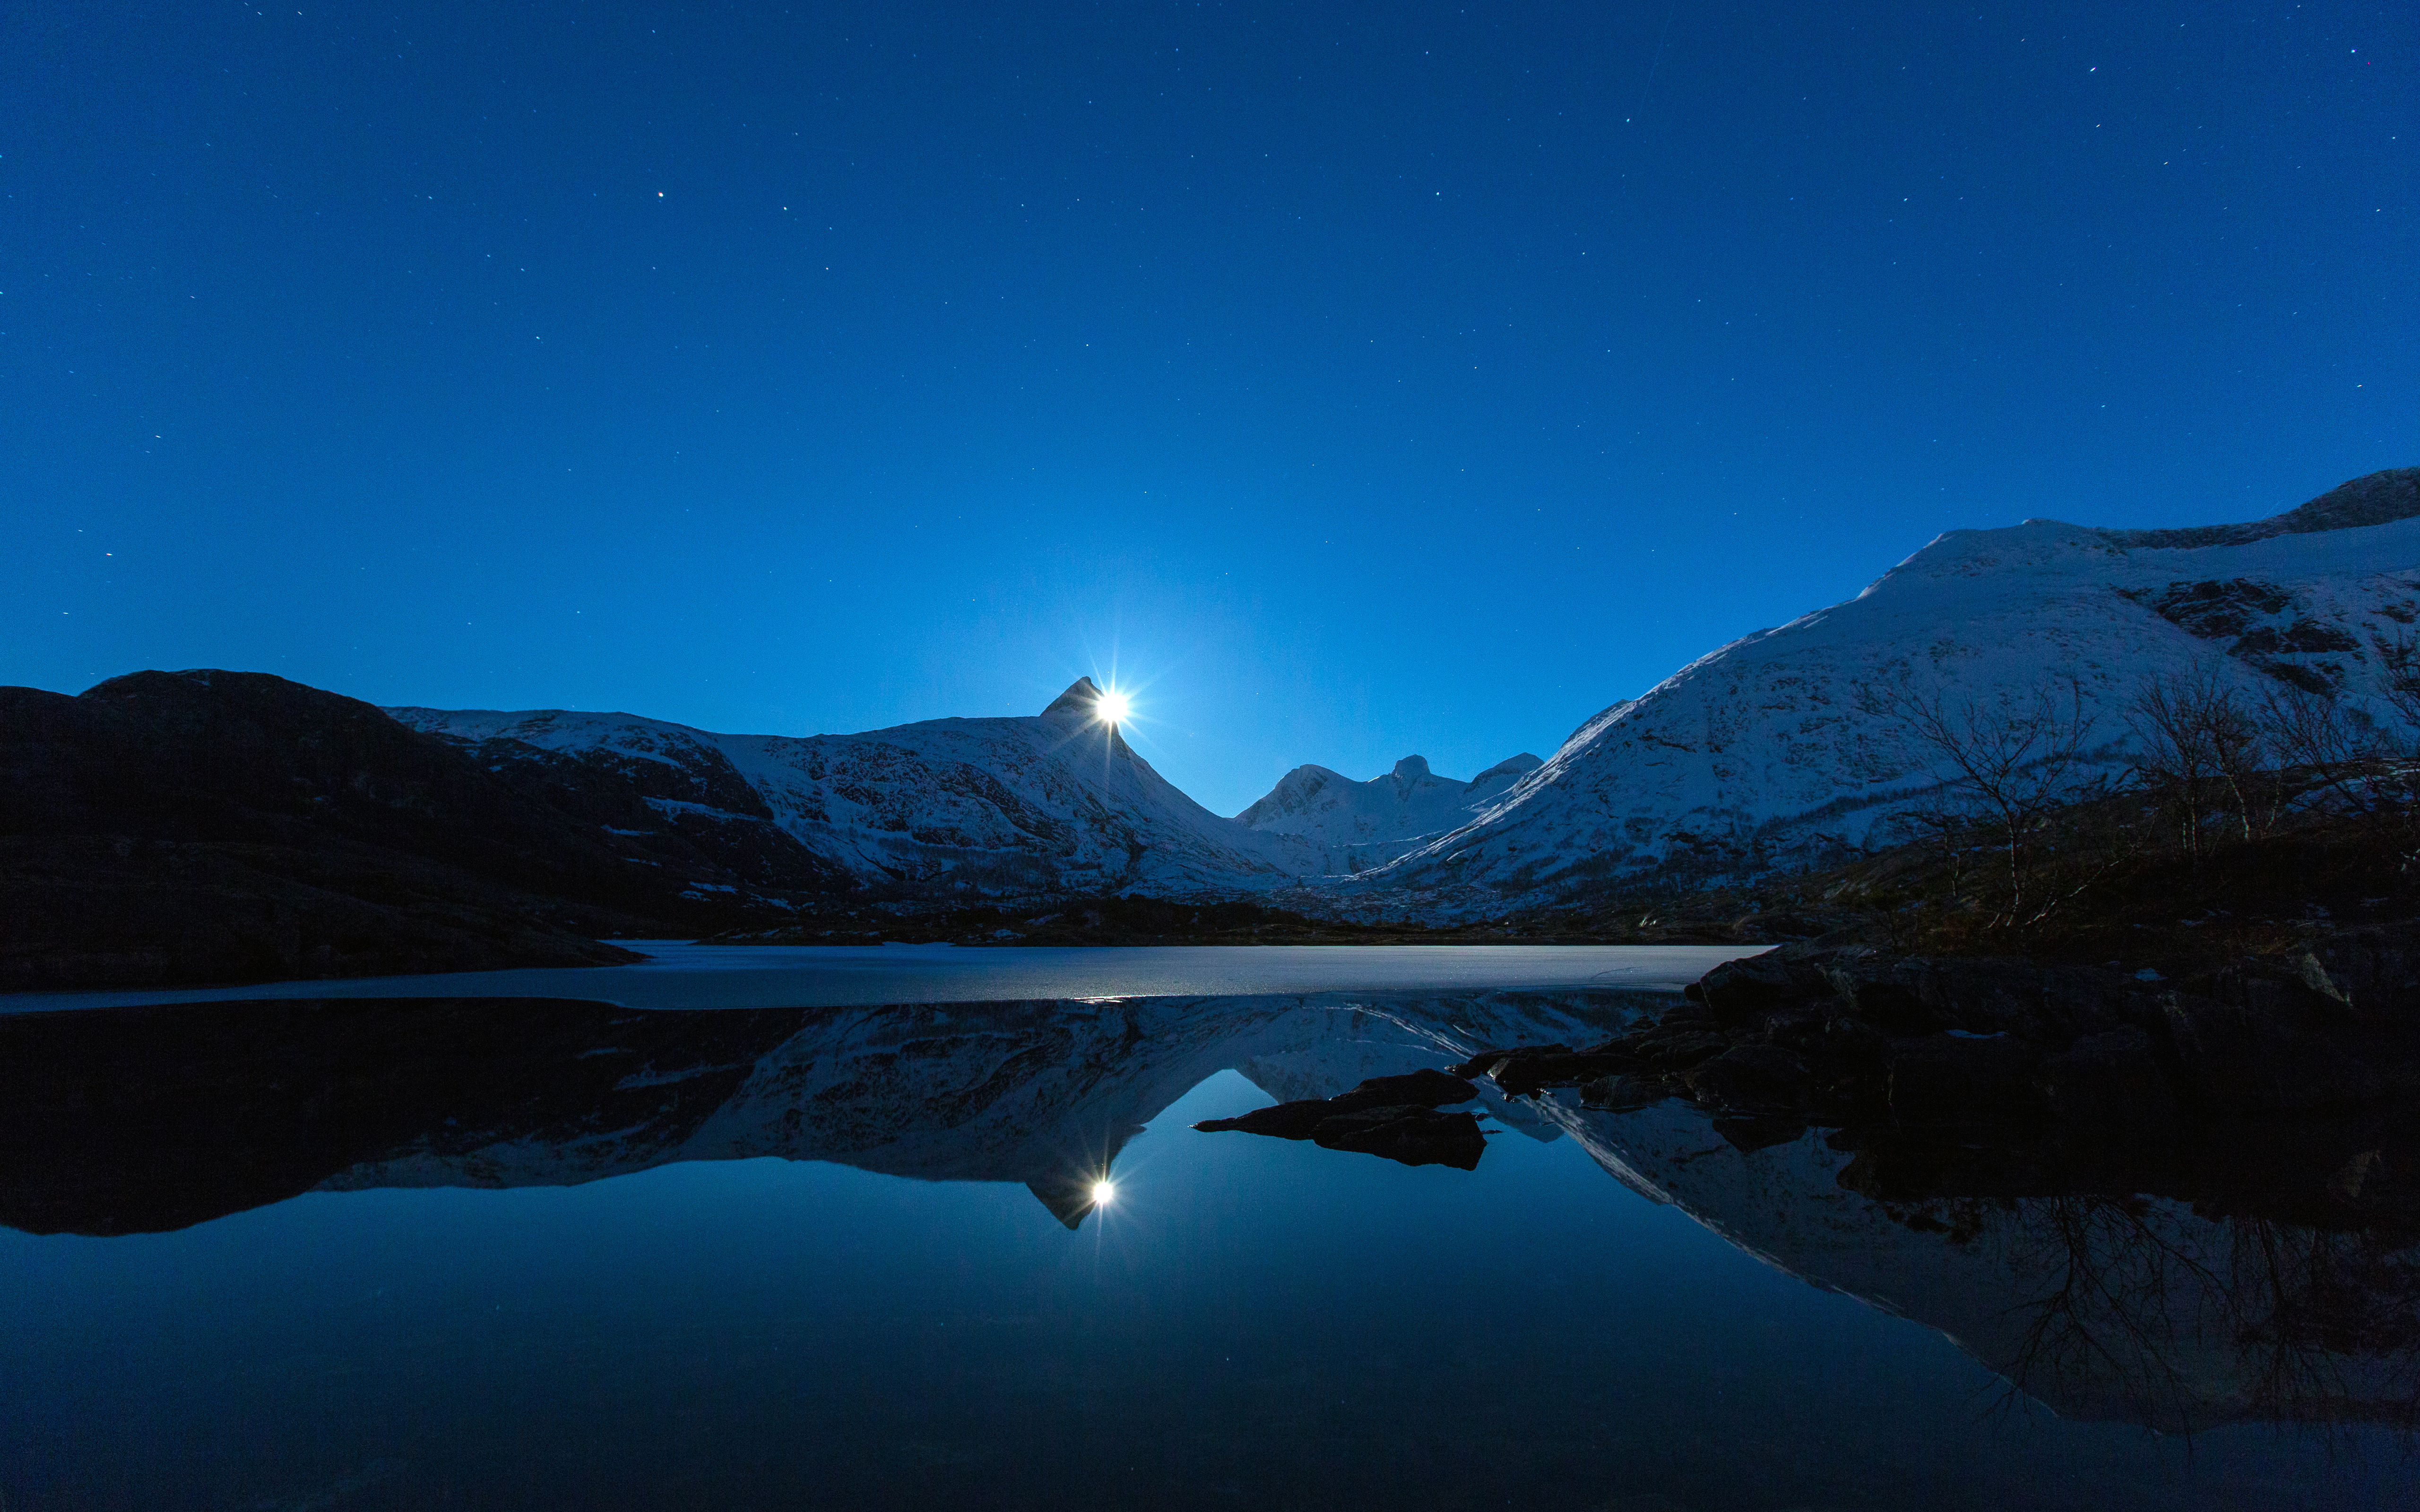 General 5120x3200 nature landscape clear sky night hills Moon moonlight reflection ice lake low light mountains snowy peak